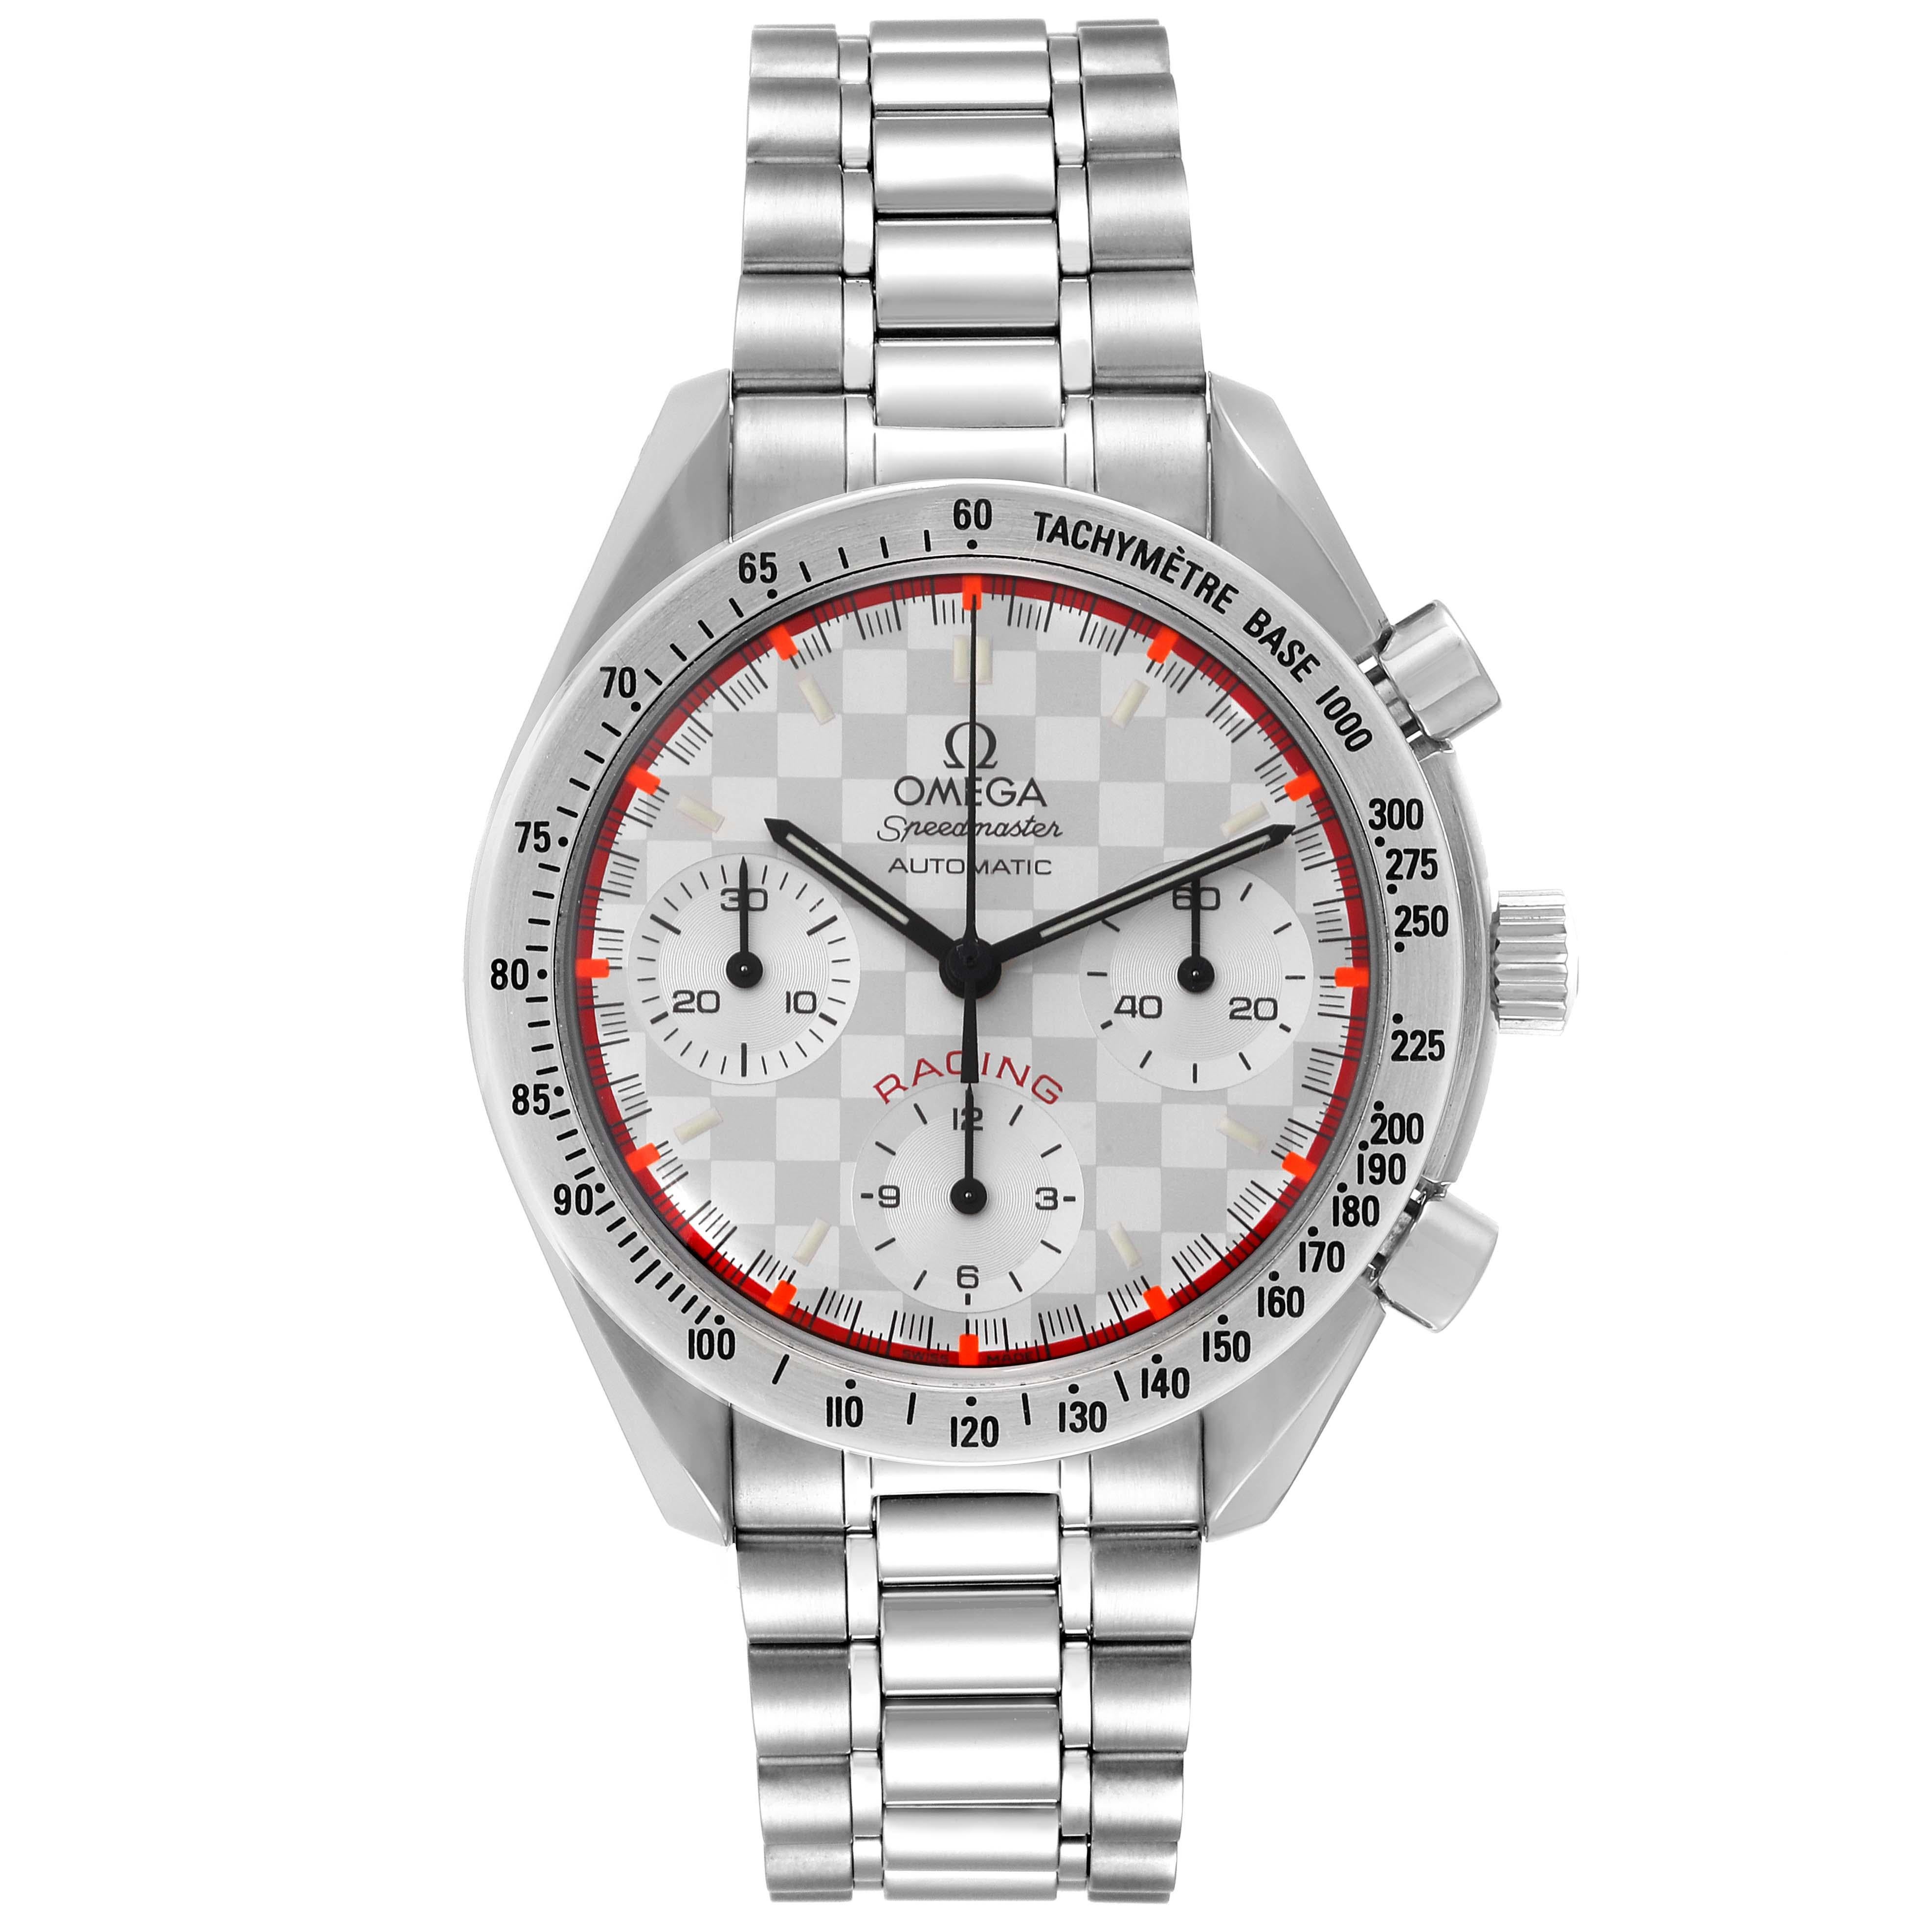 Omega Speedmaster Schumacher Racing LE Steel Mens Watch 3517.30.00 Box Card. Automatic self-winding movement. Caliber 3220. Stainless steel round case 39 mm in diameter. Stainless steel bezel with tachymeter function. Hesalite acrylic crystal.